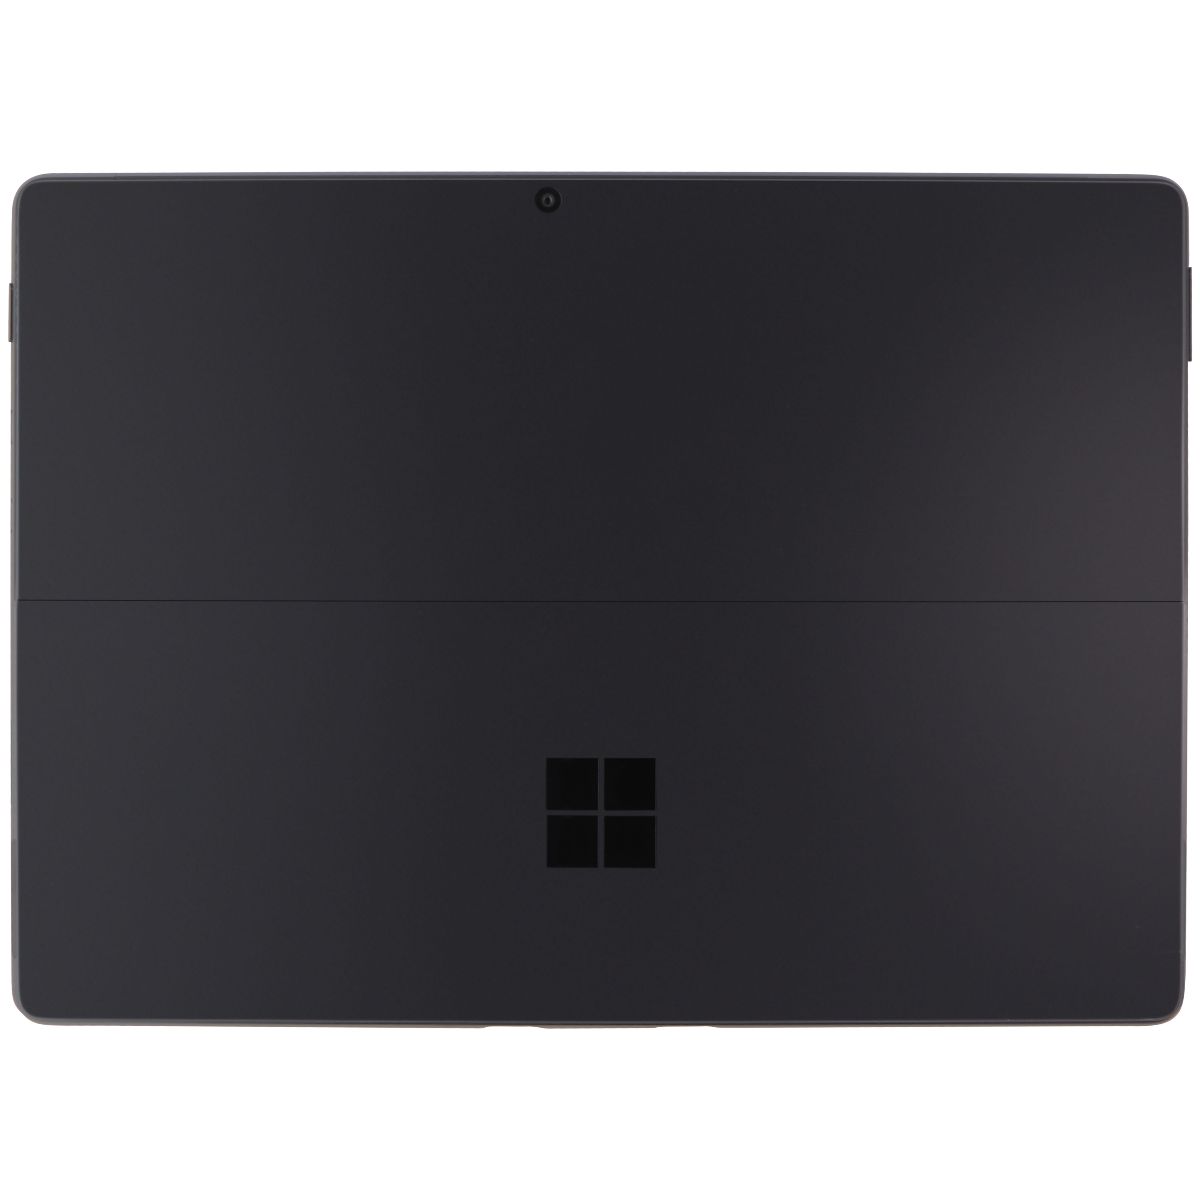 Microsoft Surface Pro 8 (13-inch) (1983) i7-1185G7 / 512GB SSD / 16GB - Graphite iPads, Tablets & eBook Readers Microsoft    - Simple Cell Bulk Wholesale Pricing - USA Seller